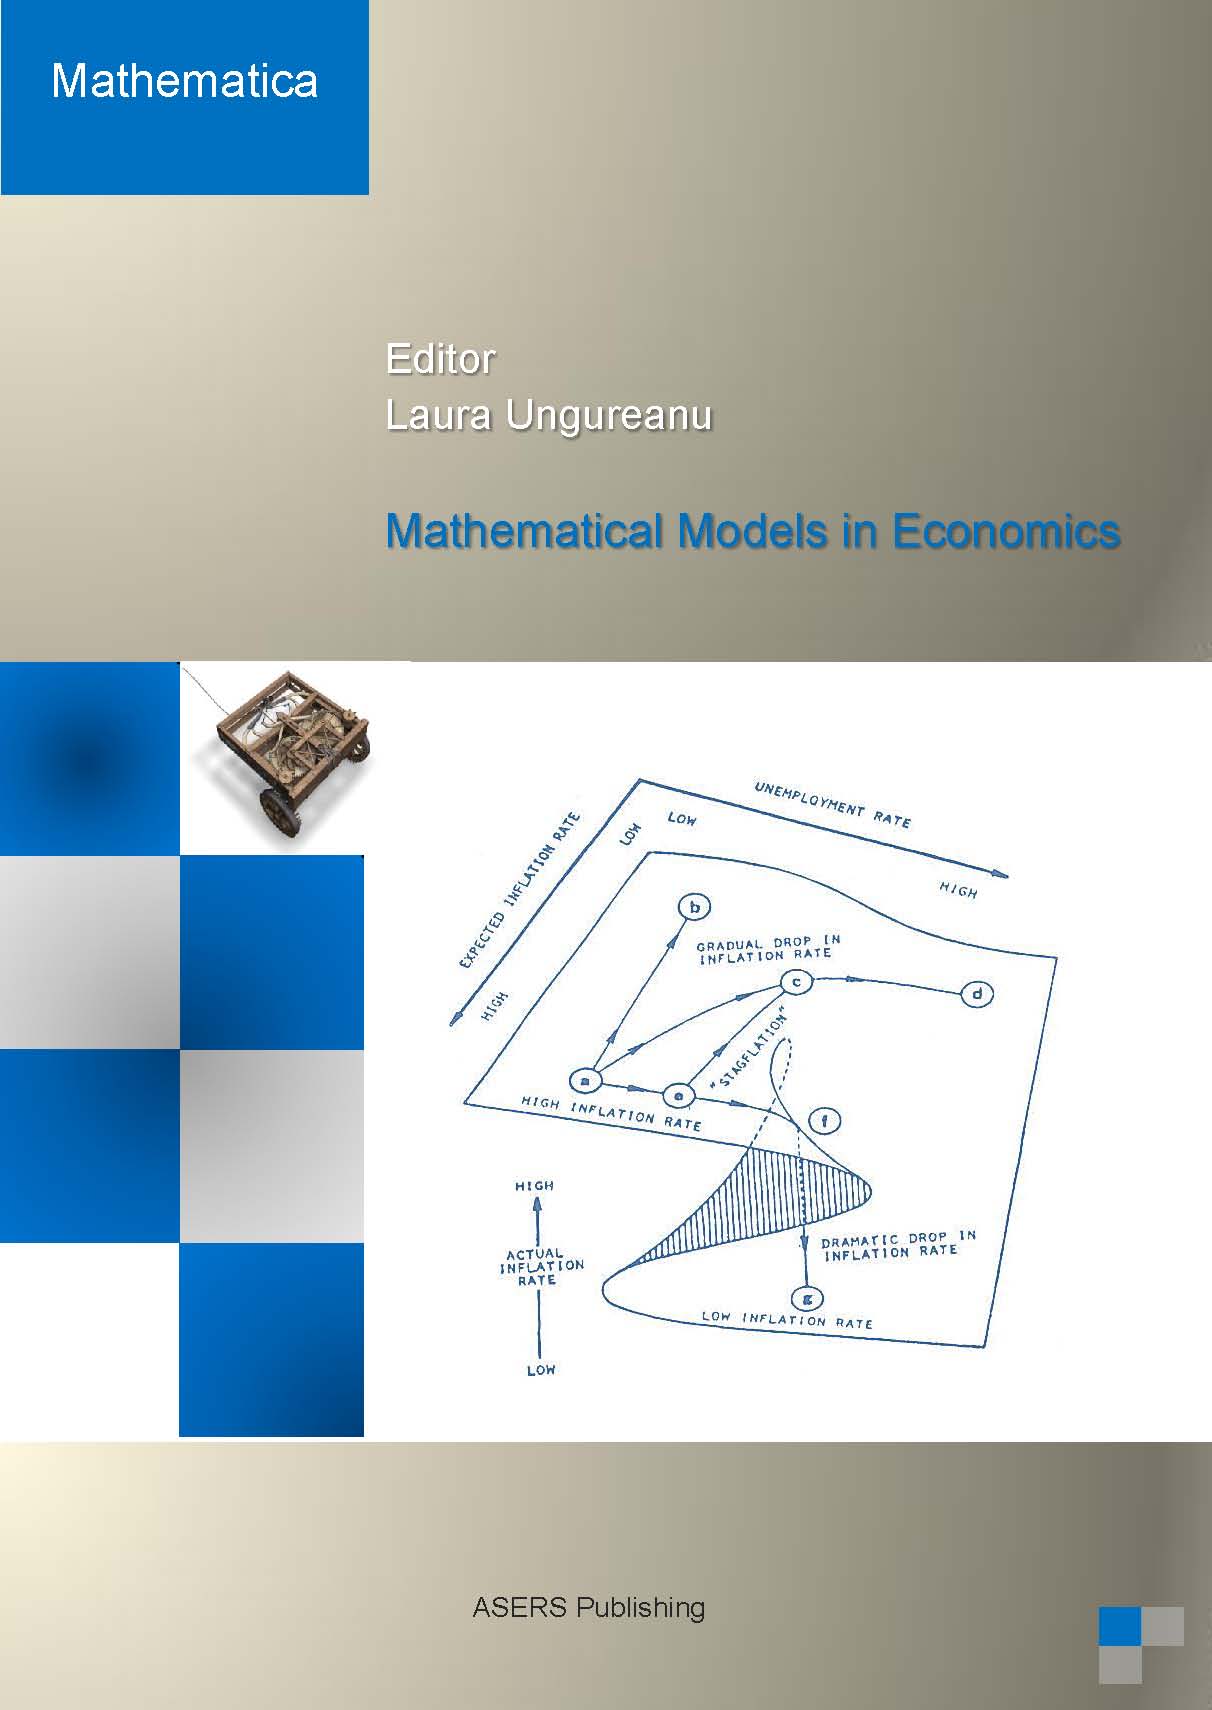 Economic Applications of Optimal Control Theory: Regional Growth and Allocation of Investment Cover Image